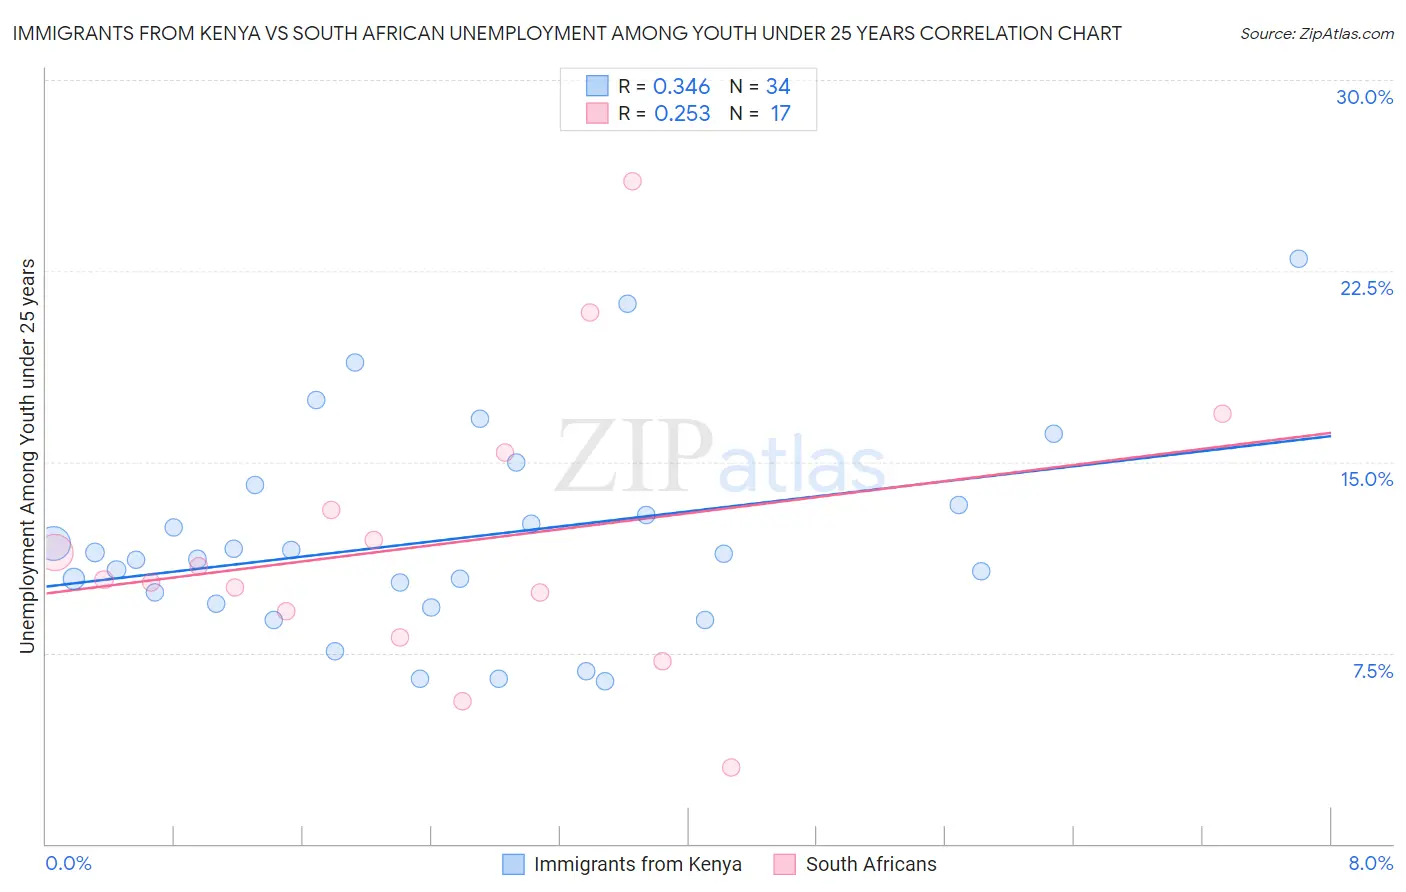 Immigrants from Kenya vs South African Unemployment Among Youth under 25 years